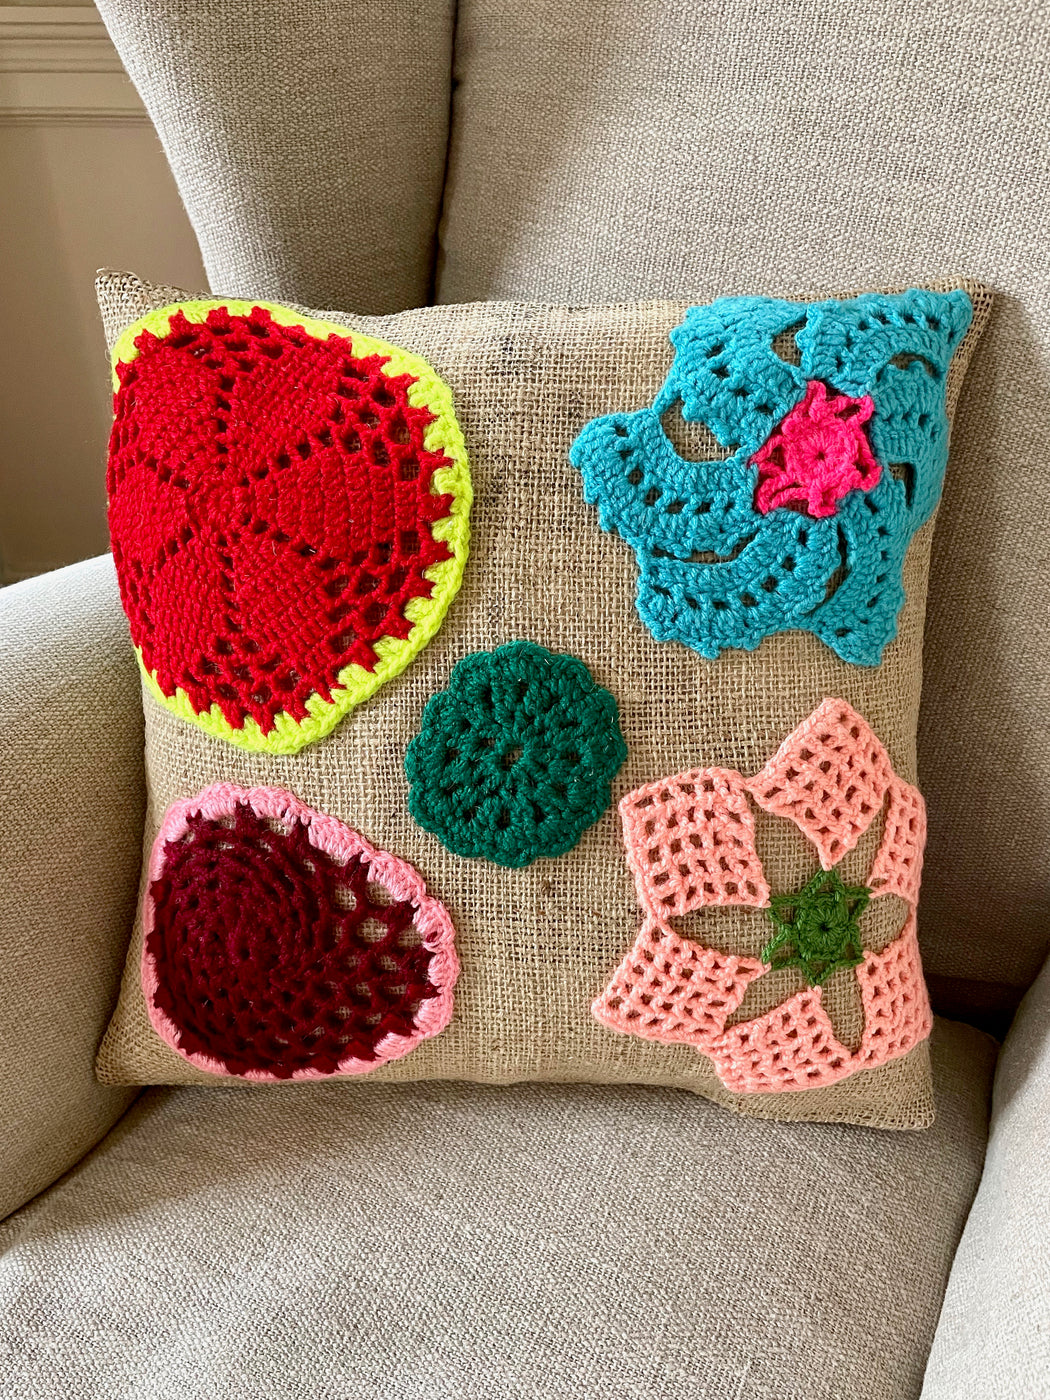 "Granny" Hand-Crocheted Pillow by Nathalie Lete